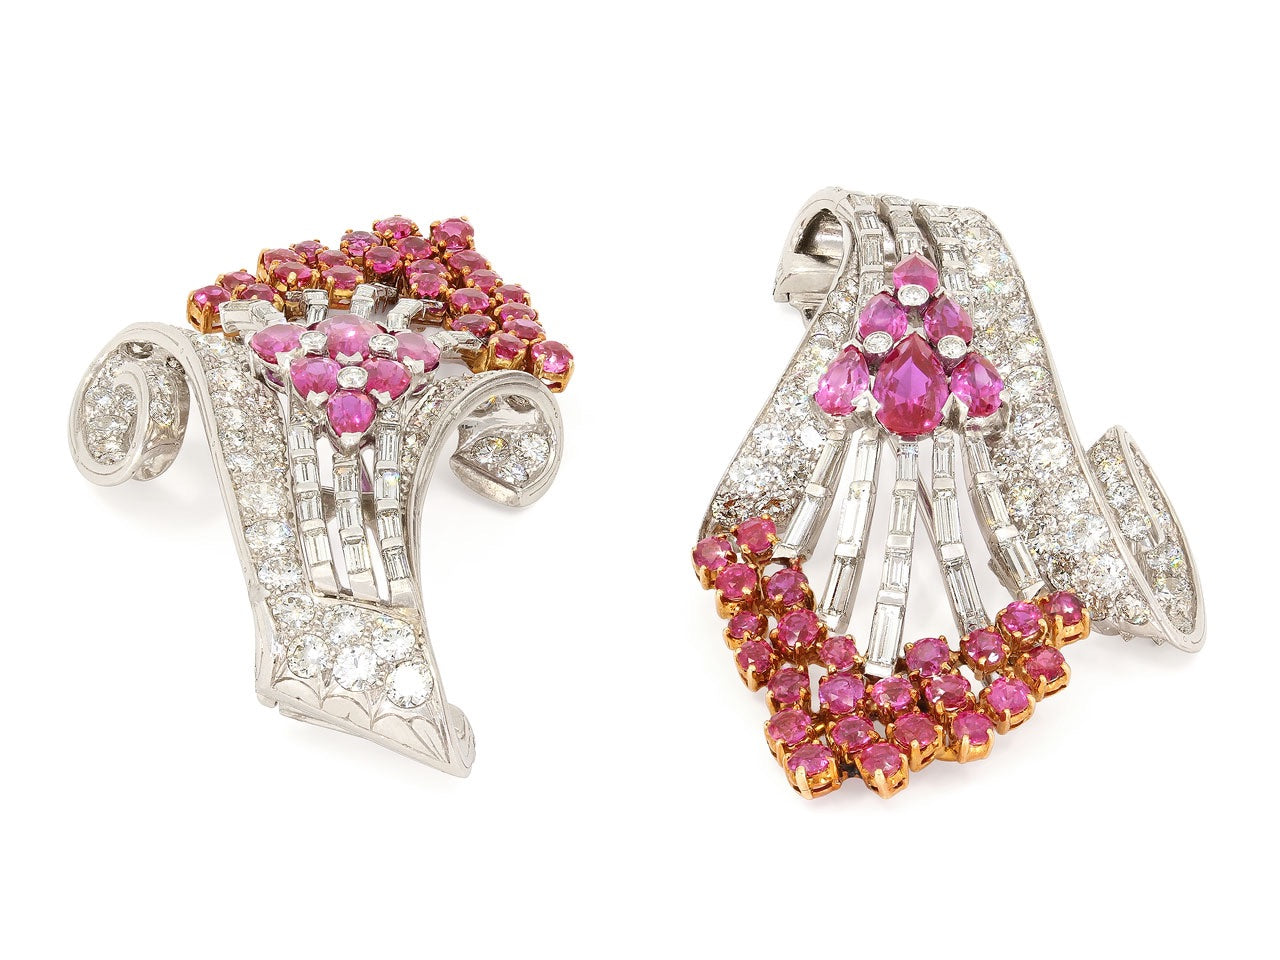 Pair of Ruby and Diamond Spray Brooches in 18K White Gold